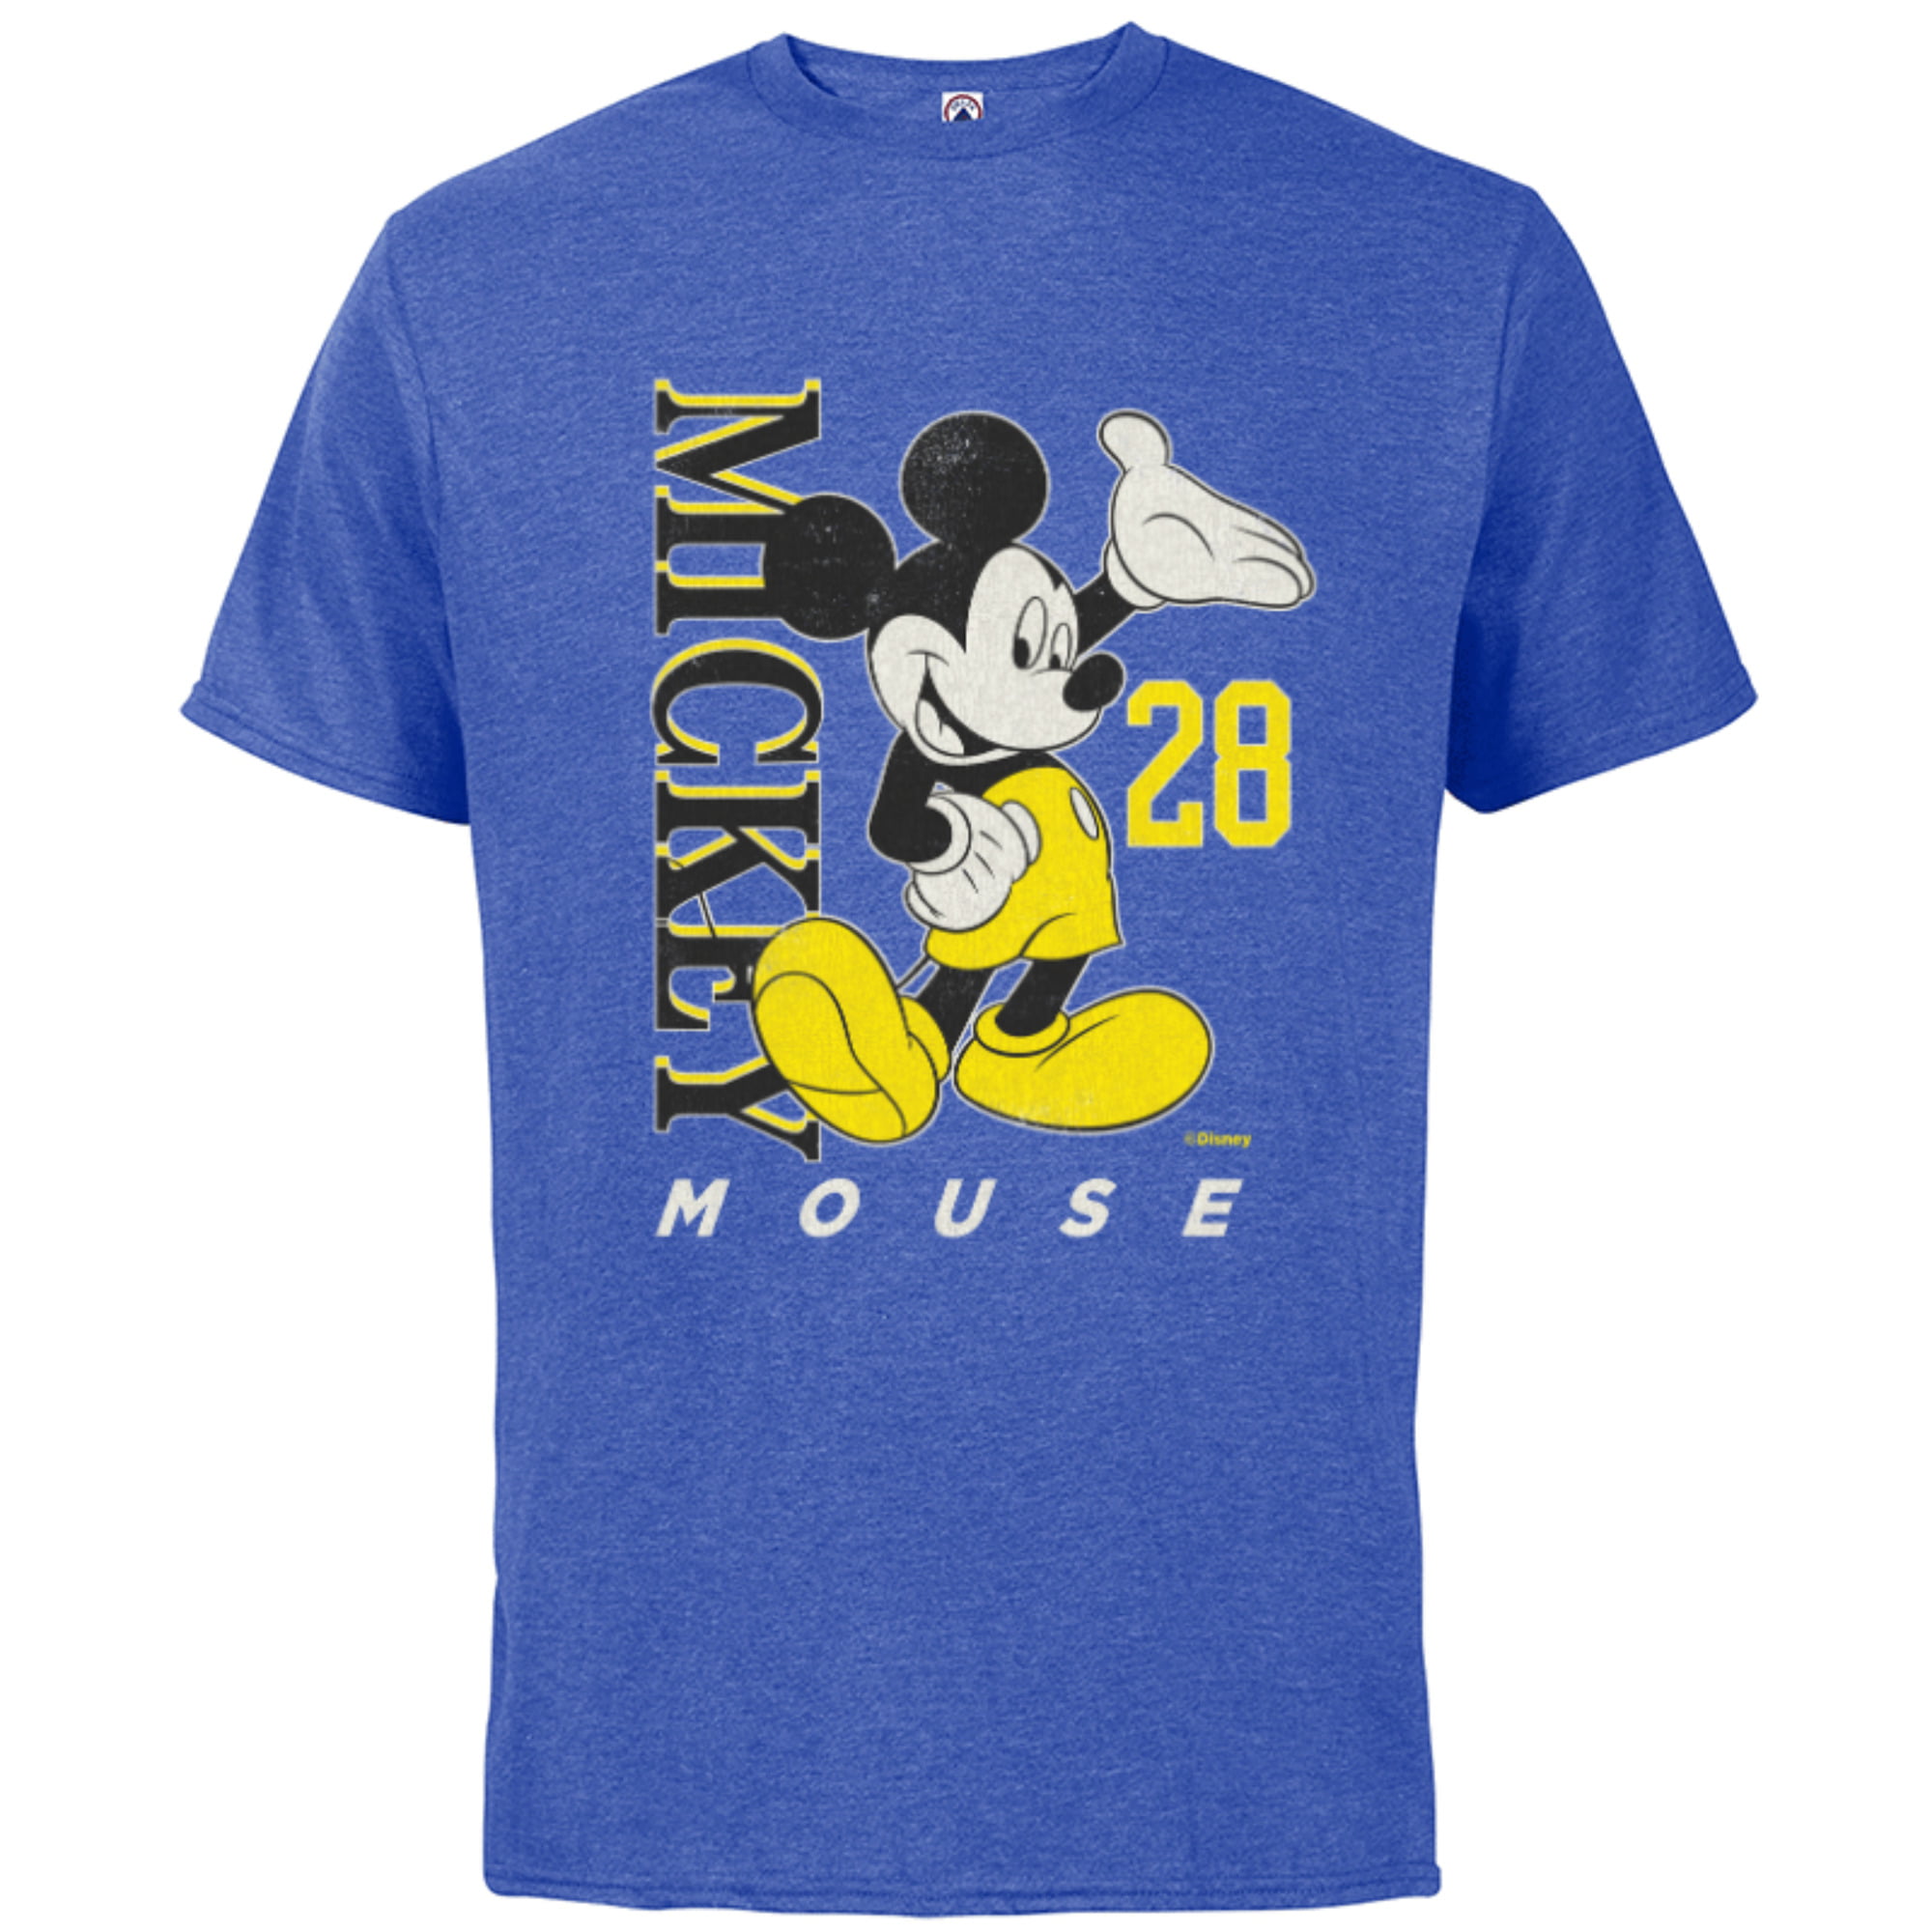 Disney Mickey Mouse Vintage - Yellow Classics Sleeve - T-Shirt Customized-Black 28 Adults & Cotton Black Short for